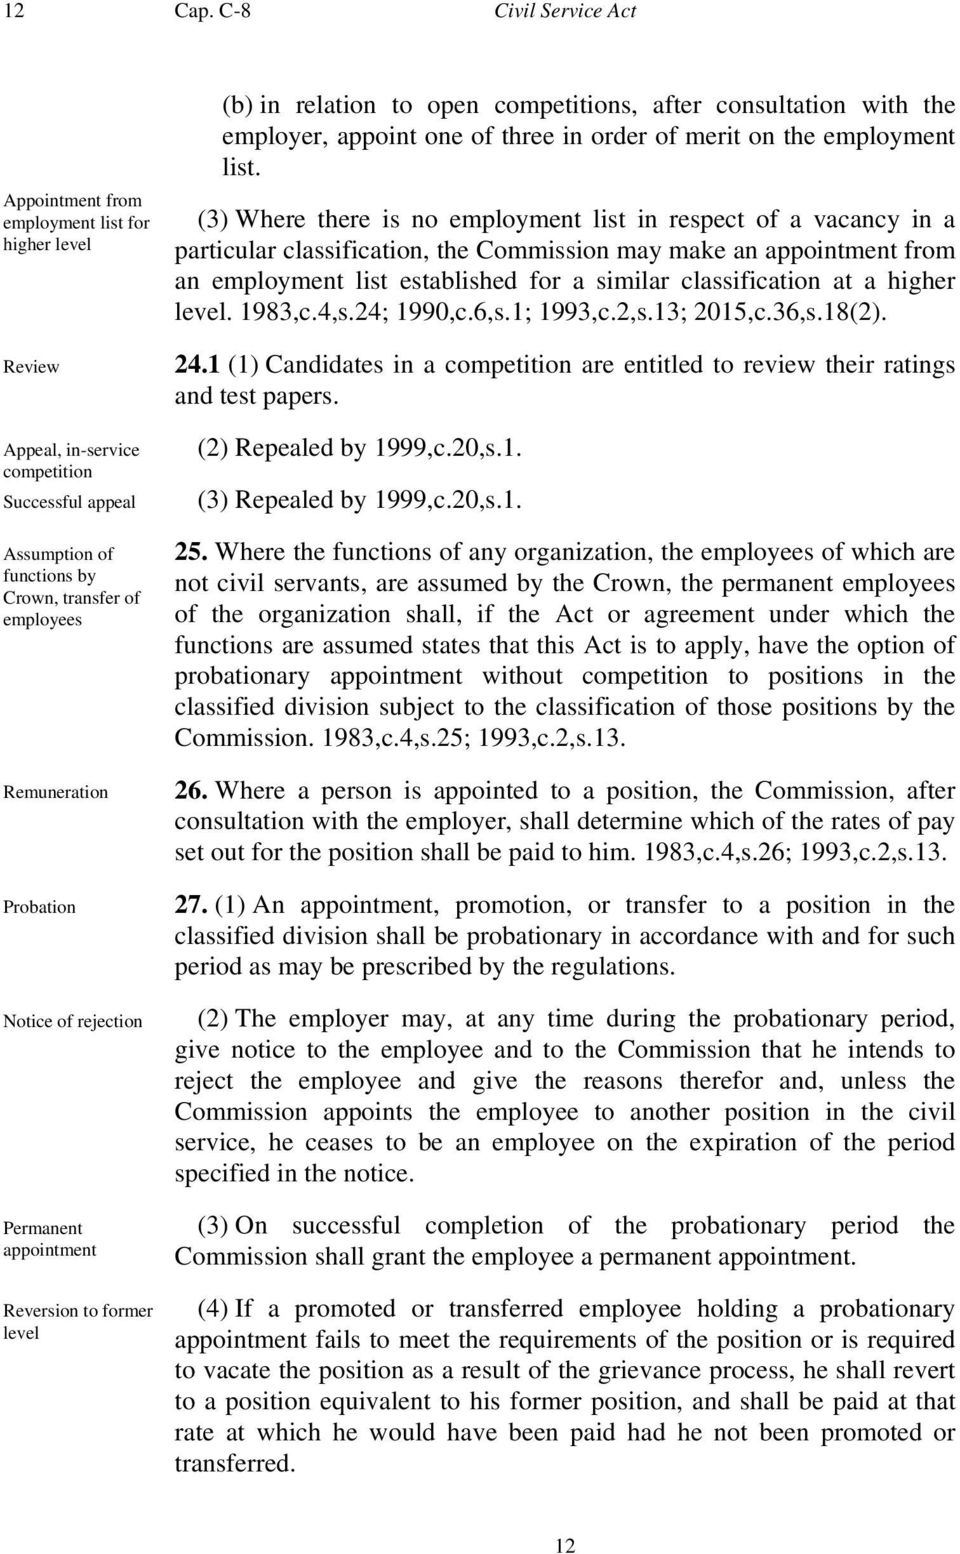 Probation Notice of rejection Permanent appointment Reversion to former level (b) in relation to open competitions, after consultation with the employer, appoint one of three in order of merit on the